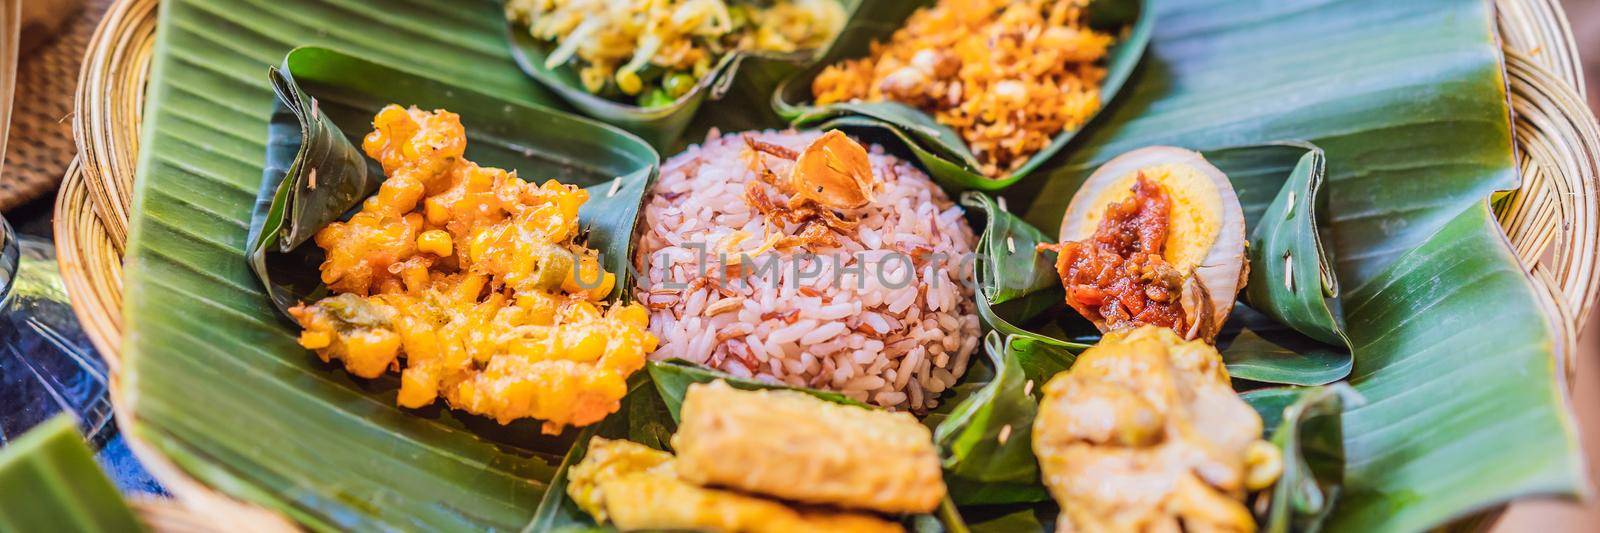 Nasi lemak, Nasi campur, Indonesian Balinese rice with potato fritter, sate lilit, fried tofu, spicy boiled eggs, and peanut BANNER, LONG FORMAT by galitskaya